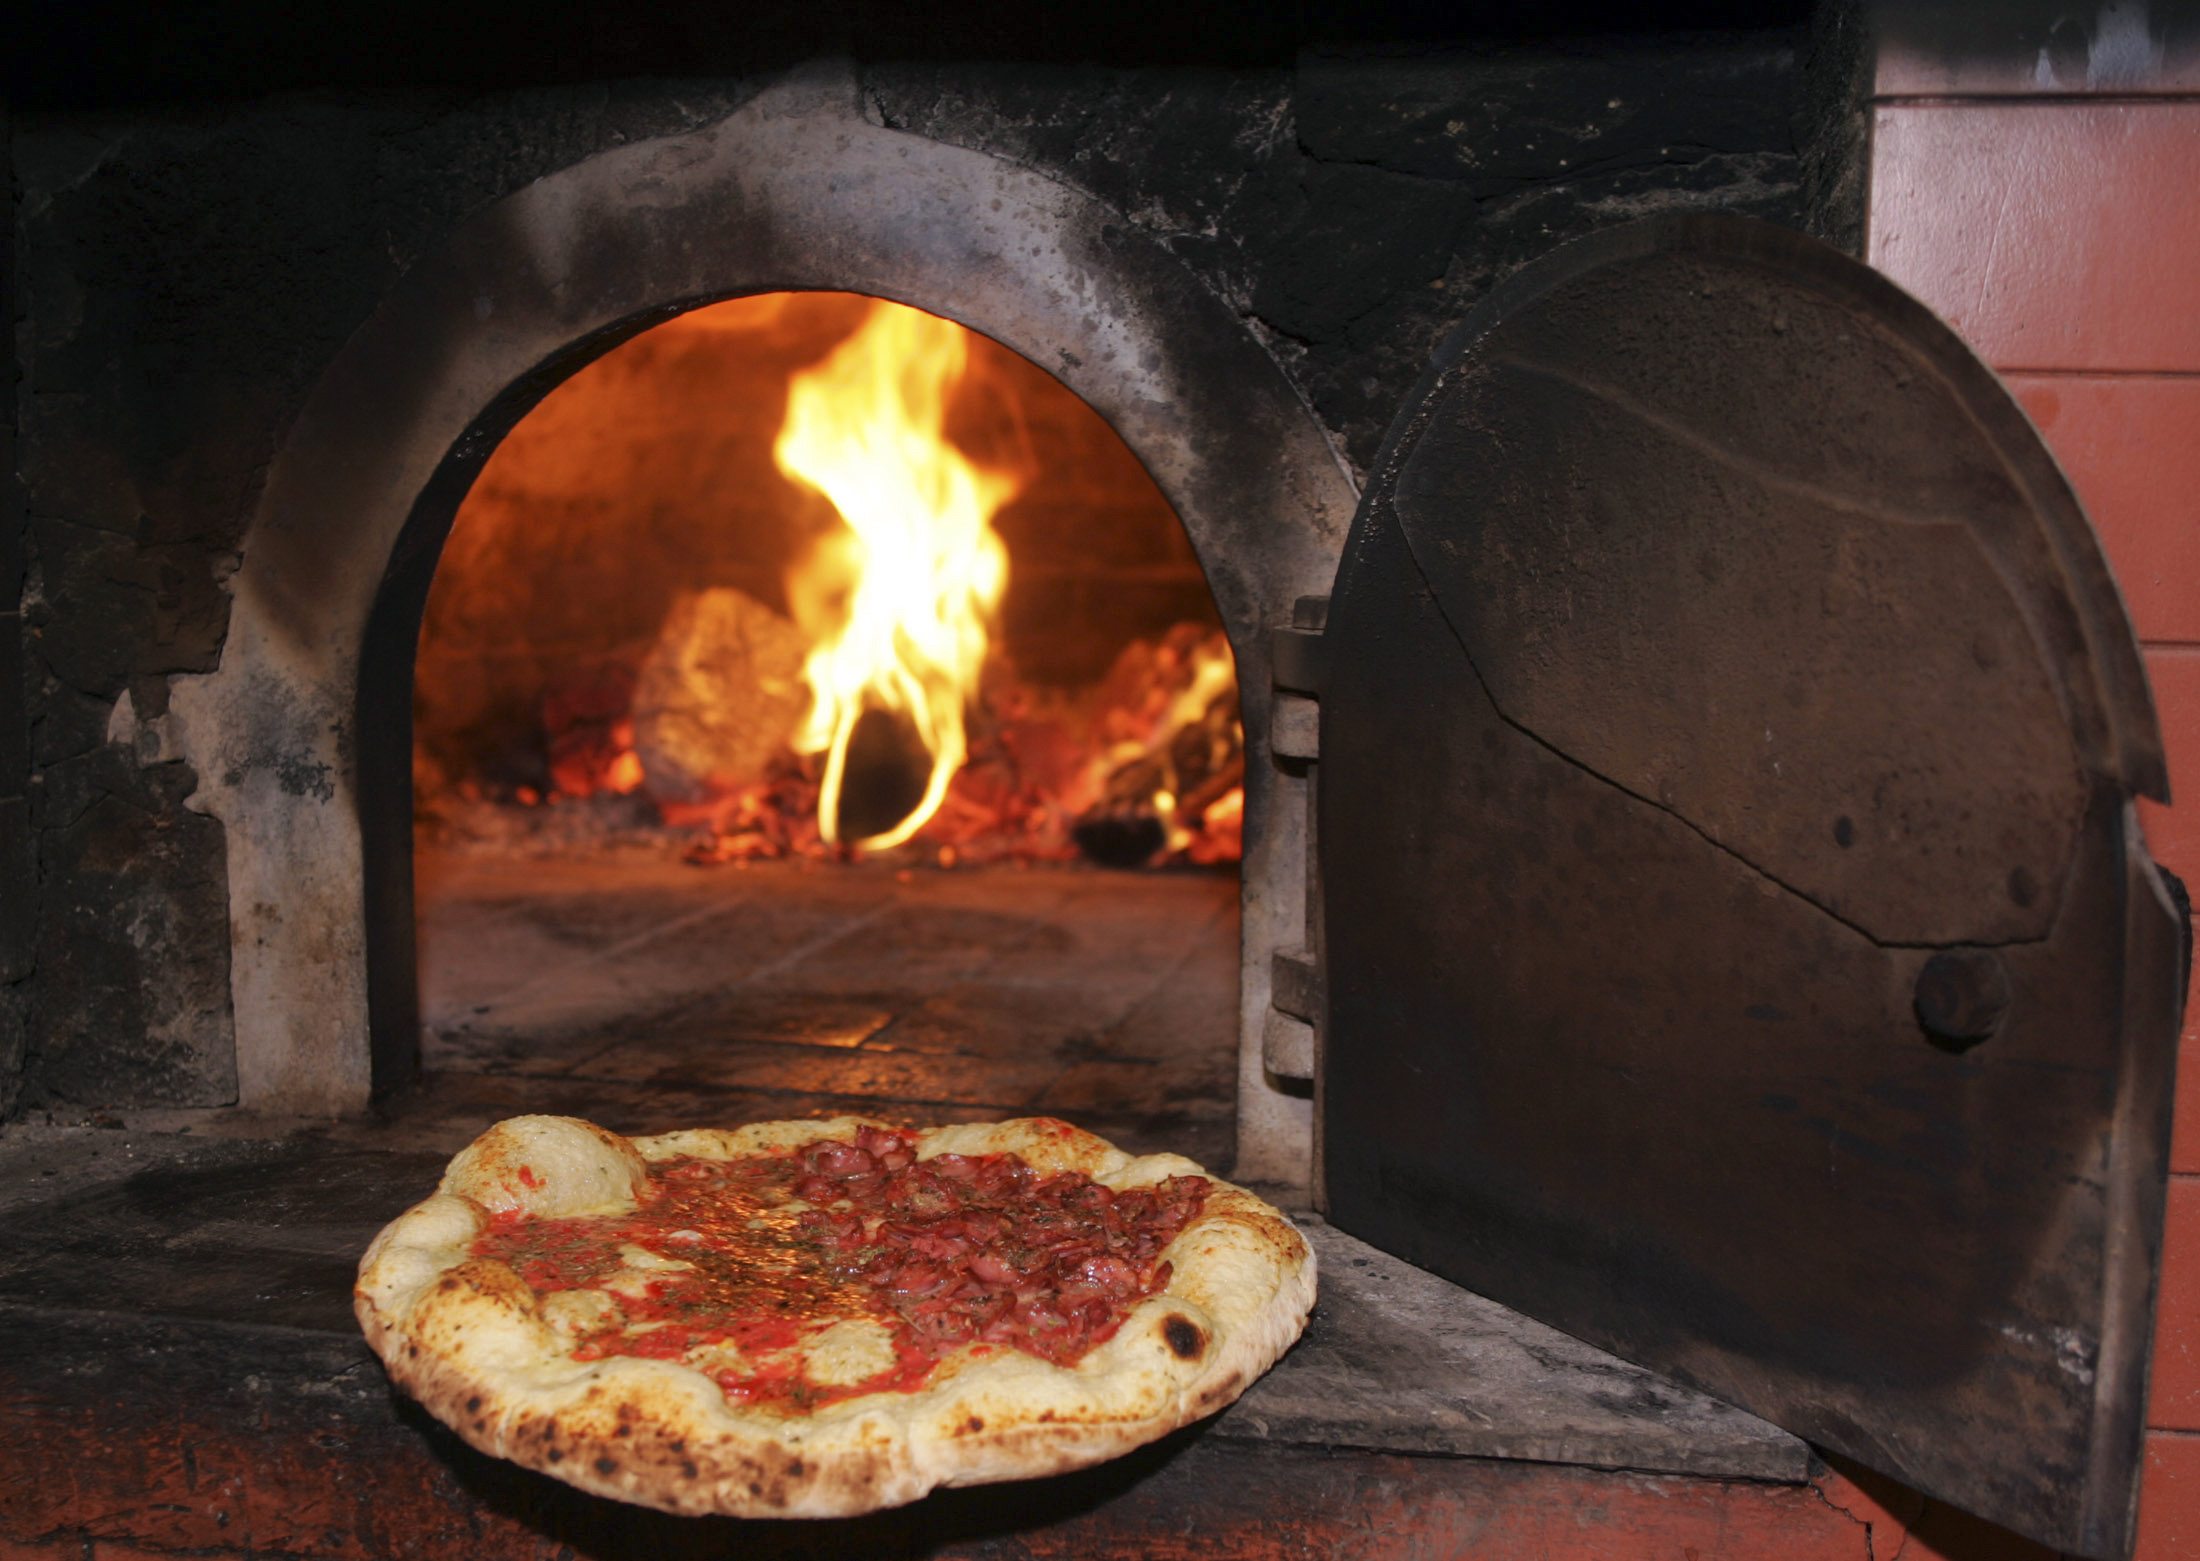 A Casteloes pizza is cooked in a wood-burning oven at Casteloes pizzeria in Sao Paulo, September 29, 2007. Sao Paulo is home to more than 6,000 pizza parlors that, in all, churn out close to a million pies a day, according to the local association of pizzerias. By some estimates, only New Yorkers devour more pizzas annually than Paulistanos. REUTERS/Paulo Whitaker (BRAZIL)